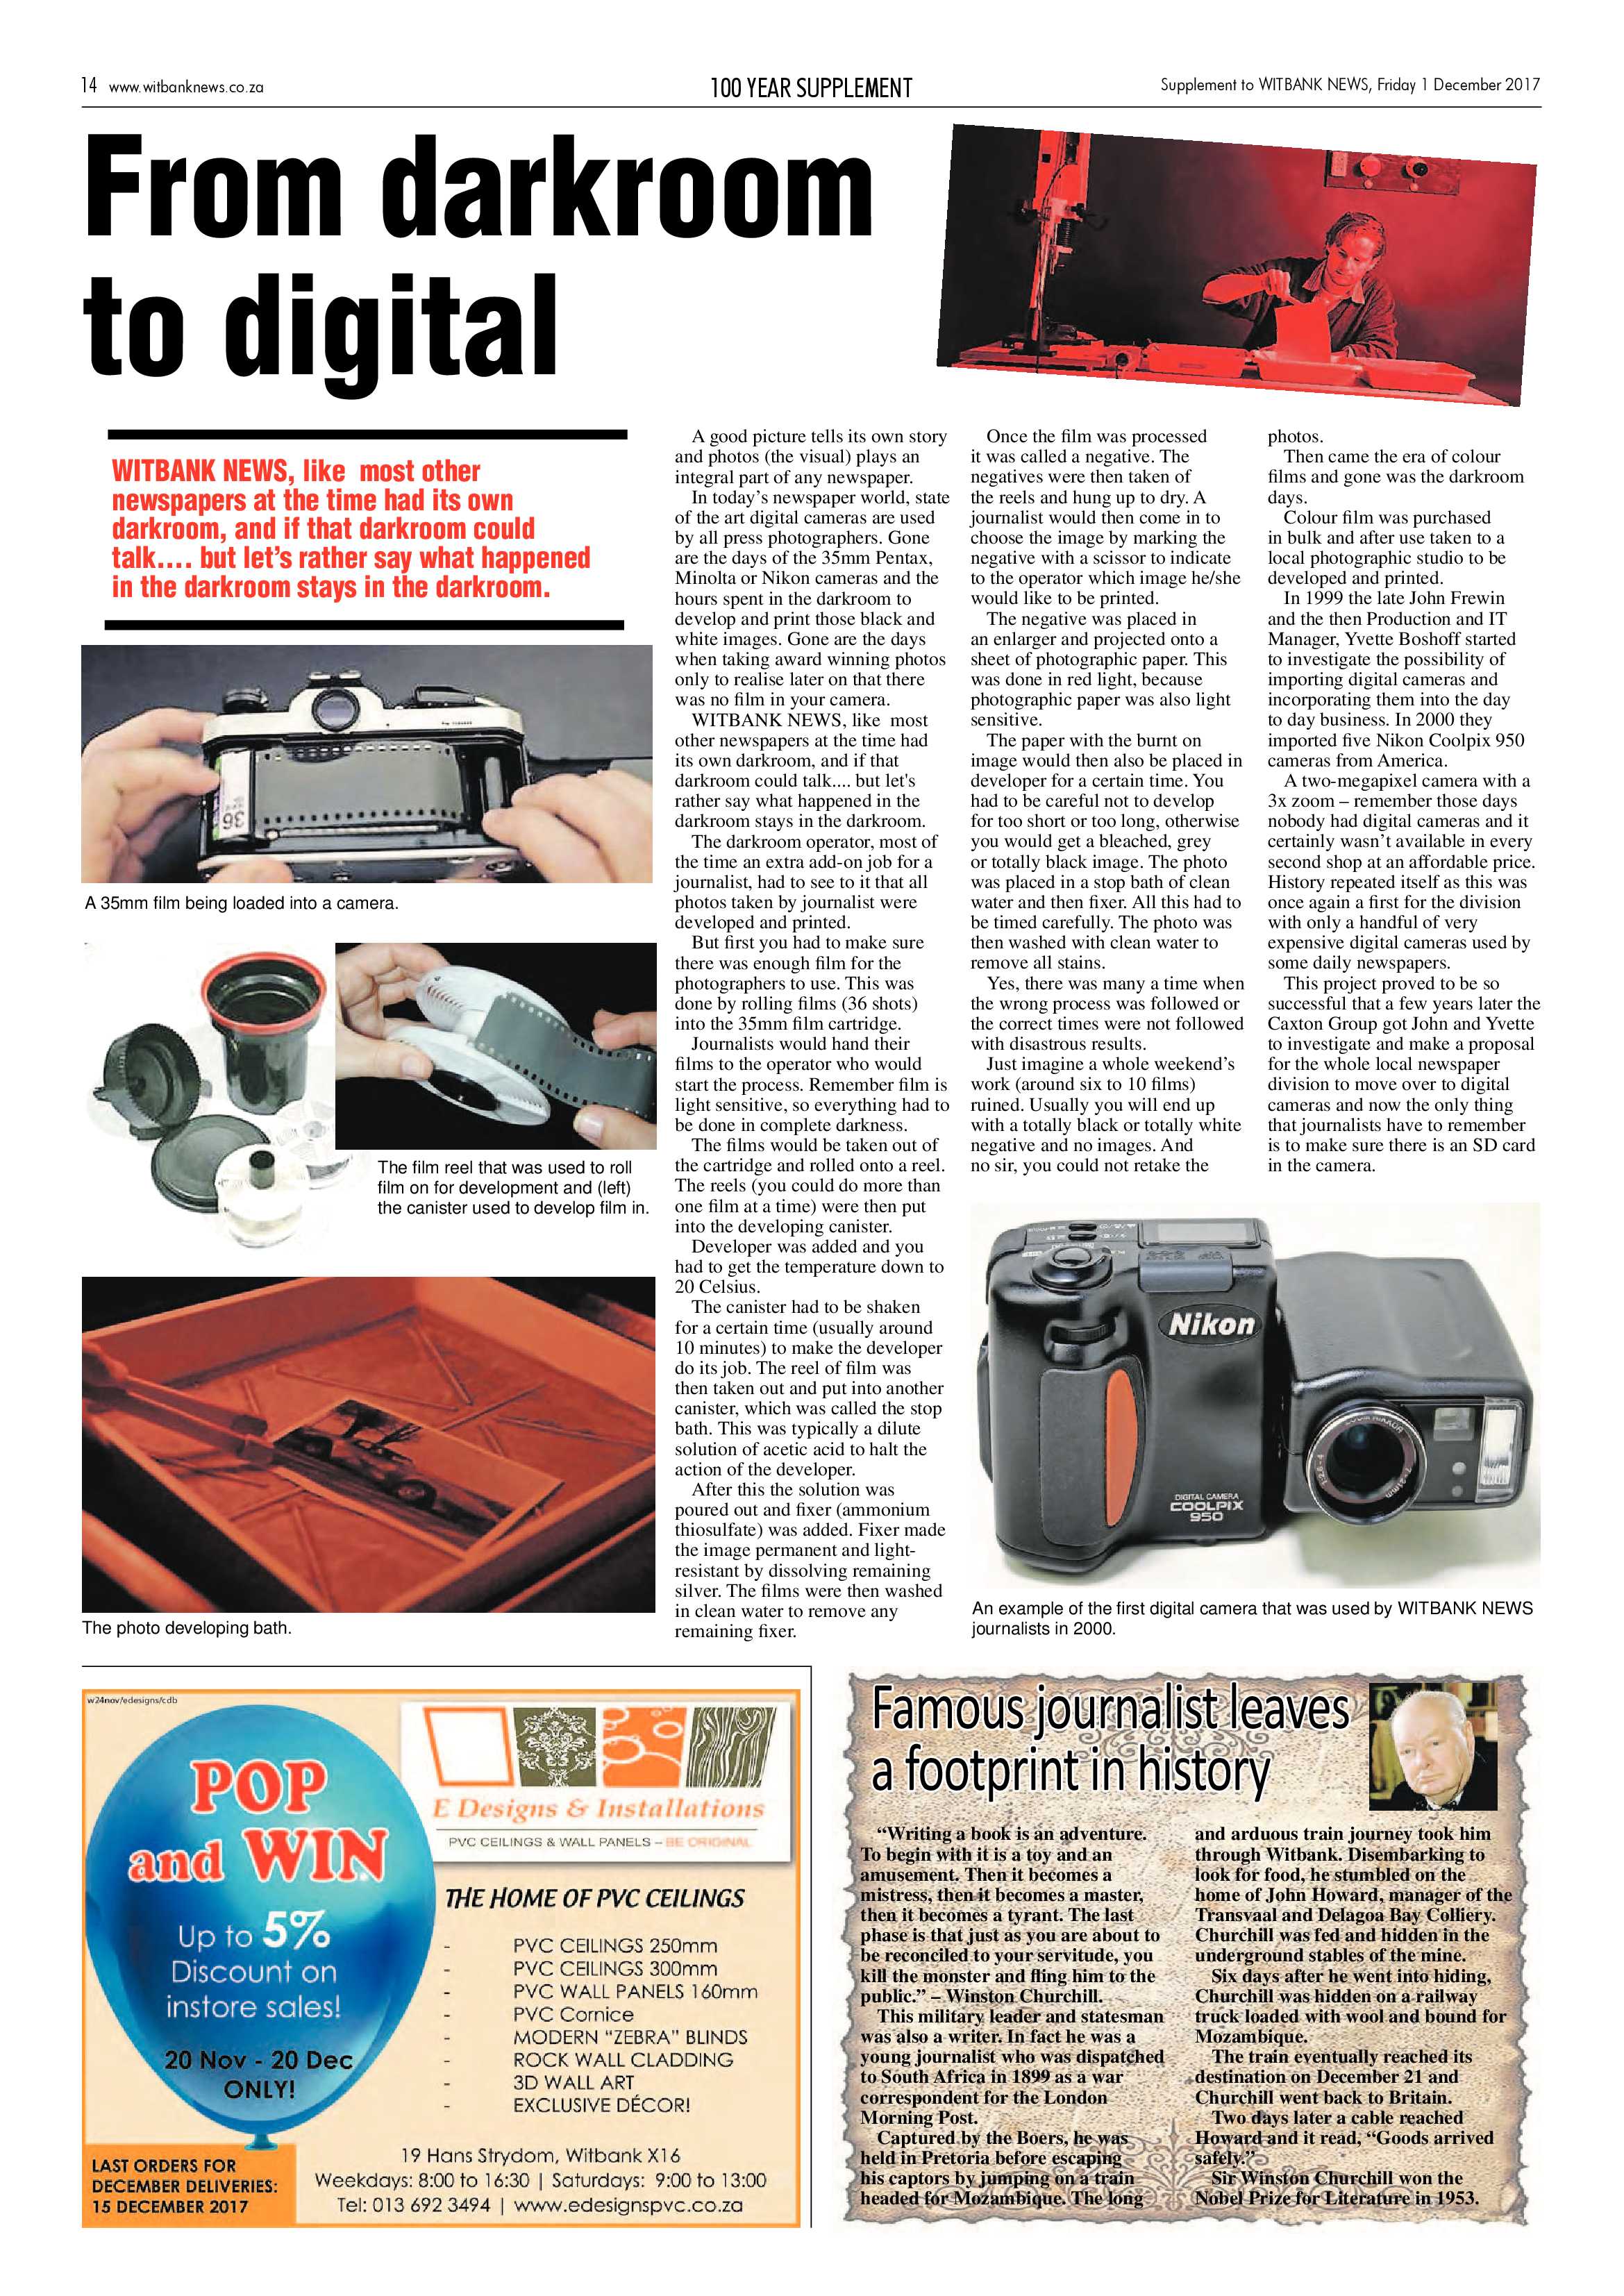 Witbank News 100 Year Supplement page 14